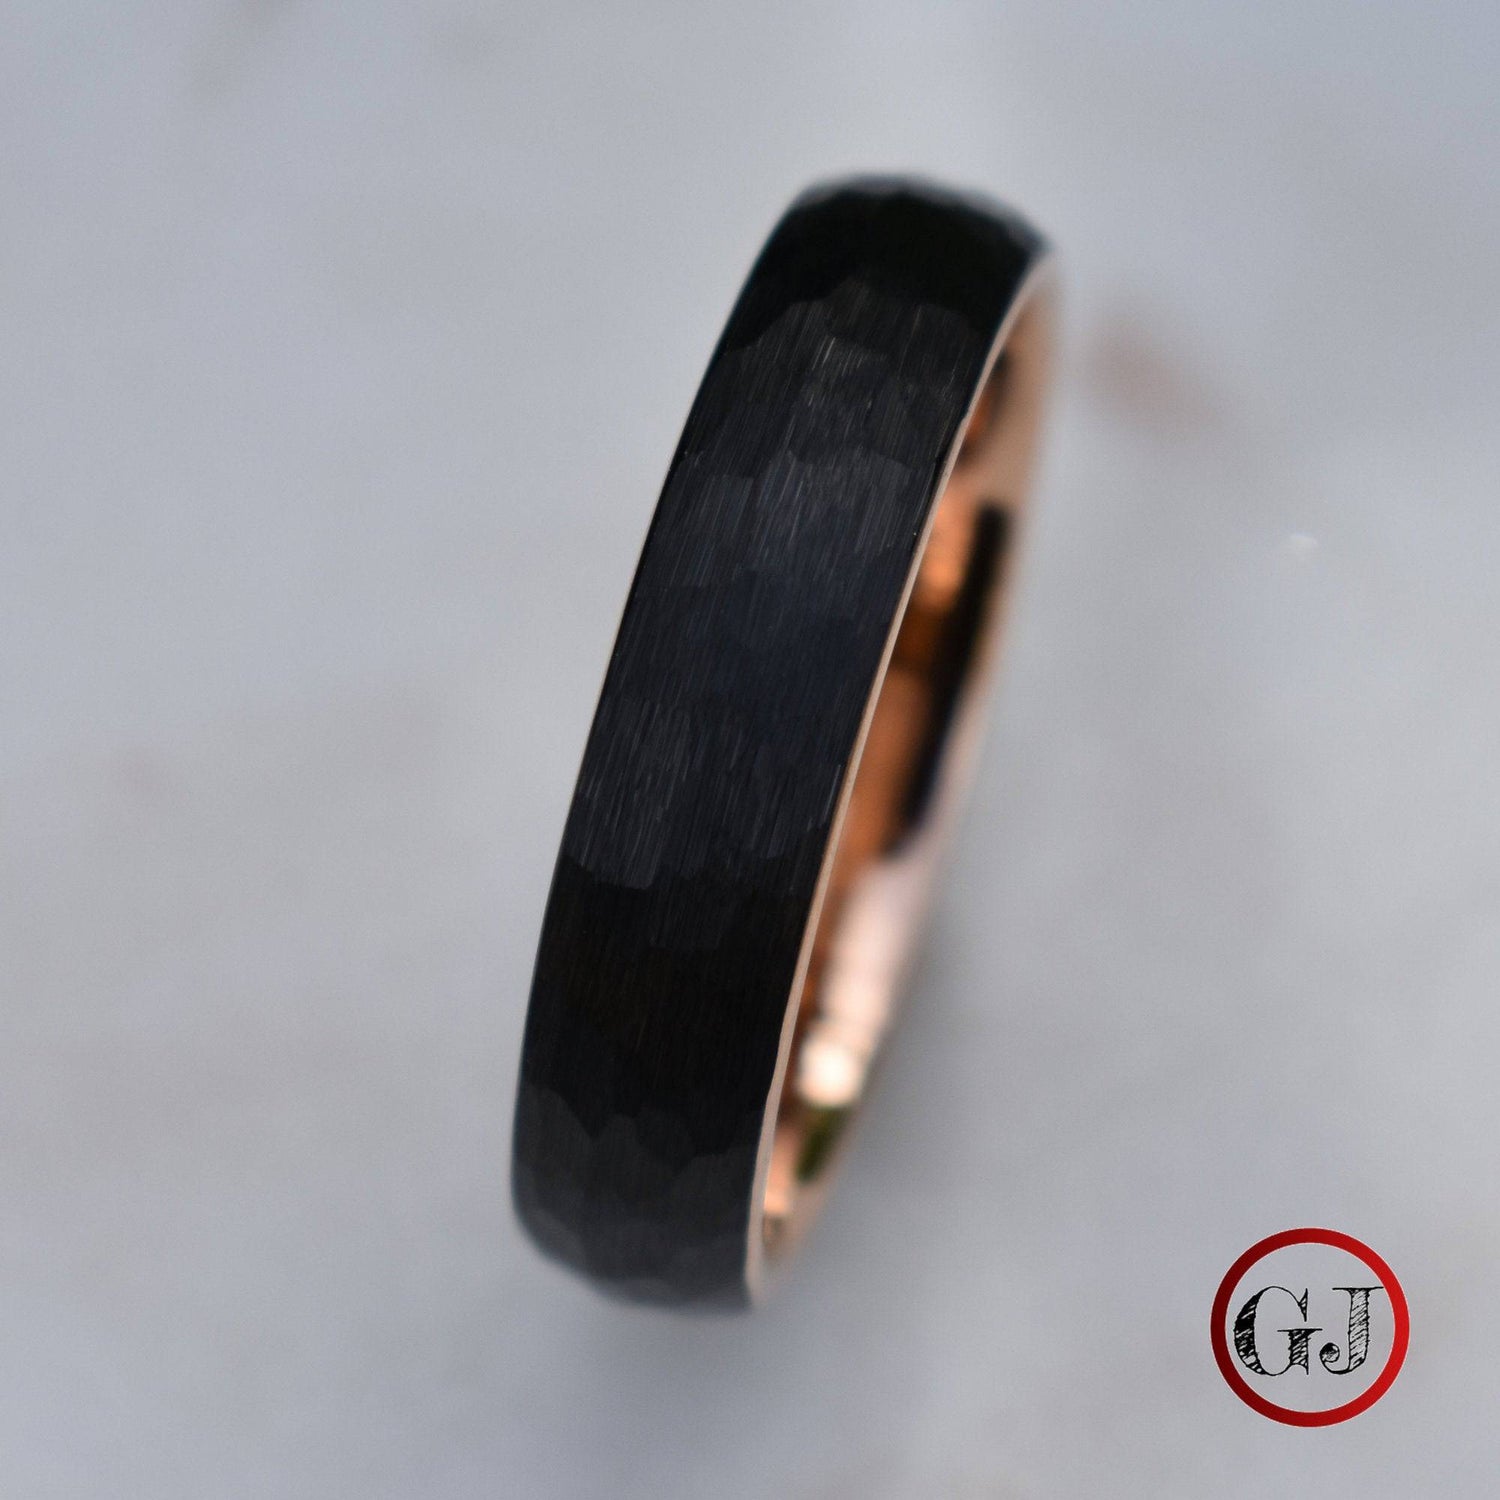 Hammered Black Tungsten 6mm Ring with Rose Gold Band - Tungsten Titans